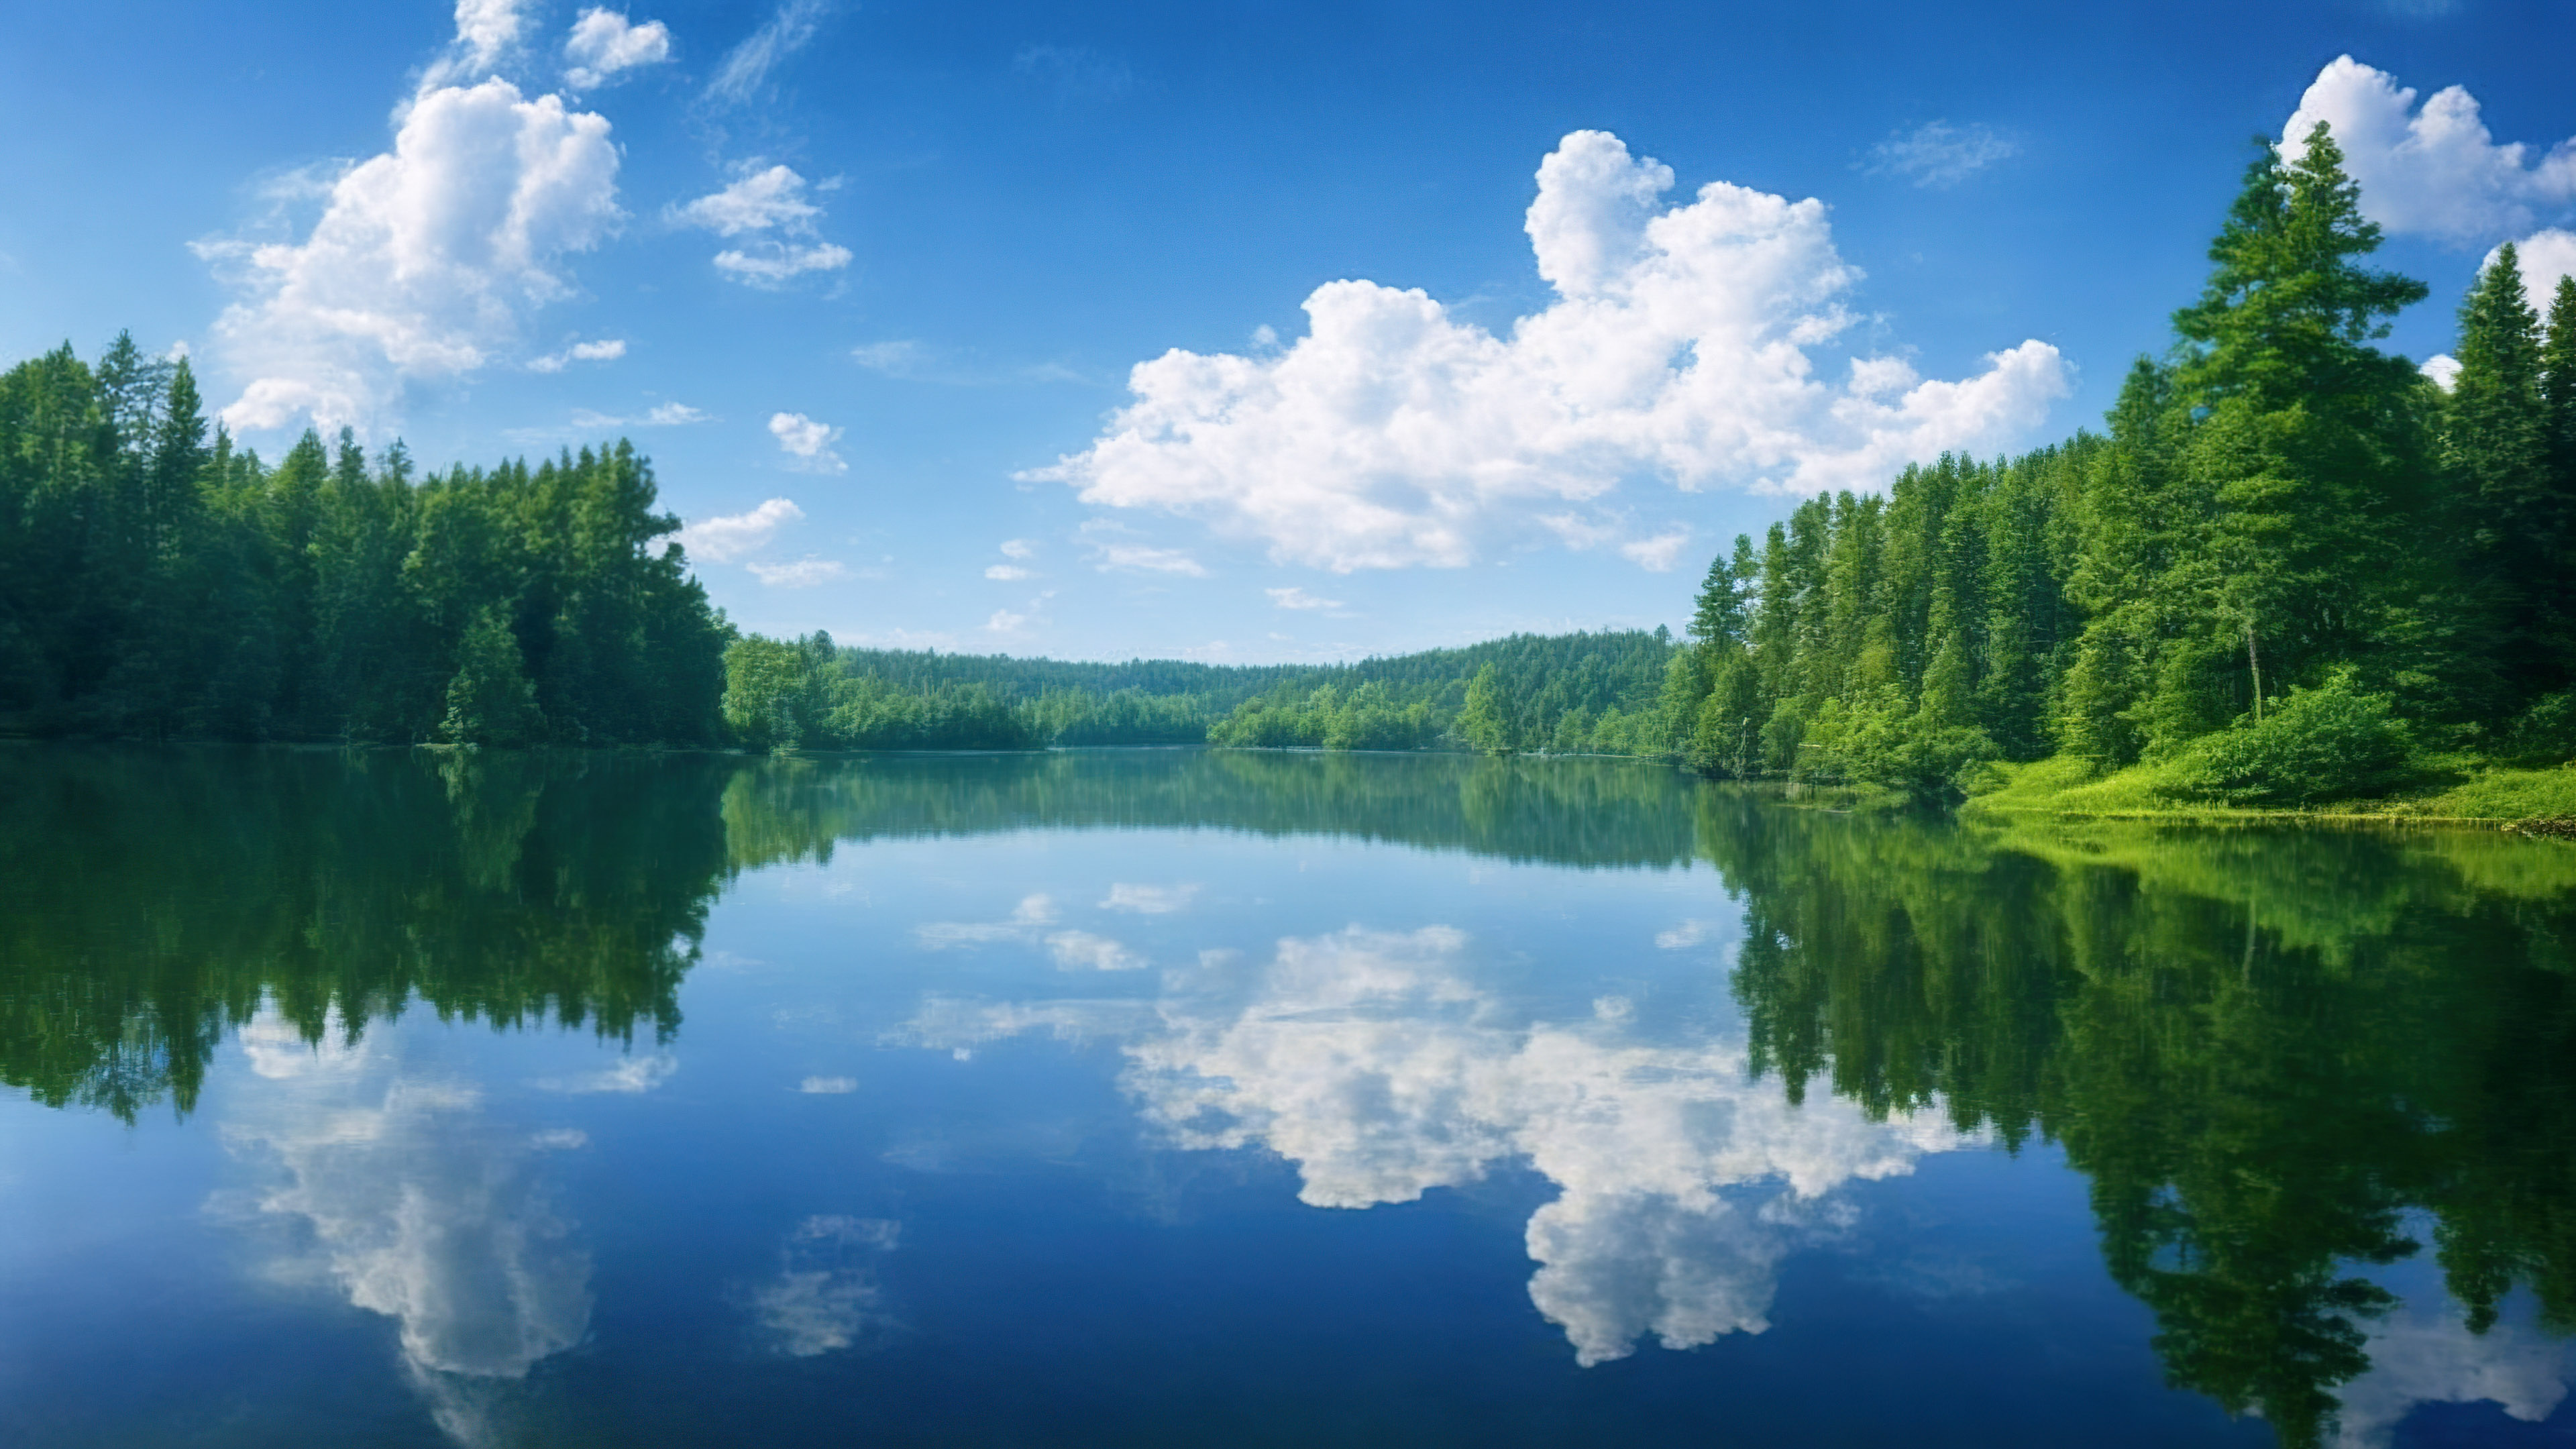 Capture the serenity of a serene lake reflecting a cloud-dappled sky, surrounded by lush, green forests with our 4K tree wallpaper.